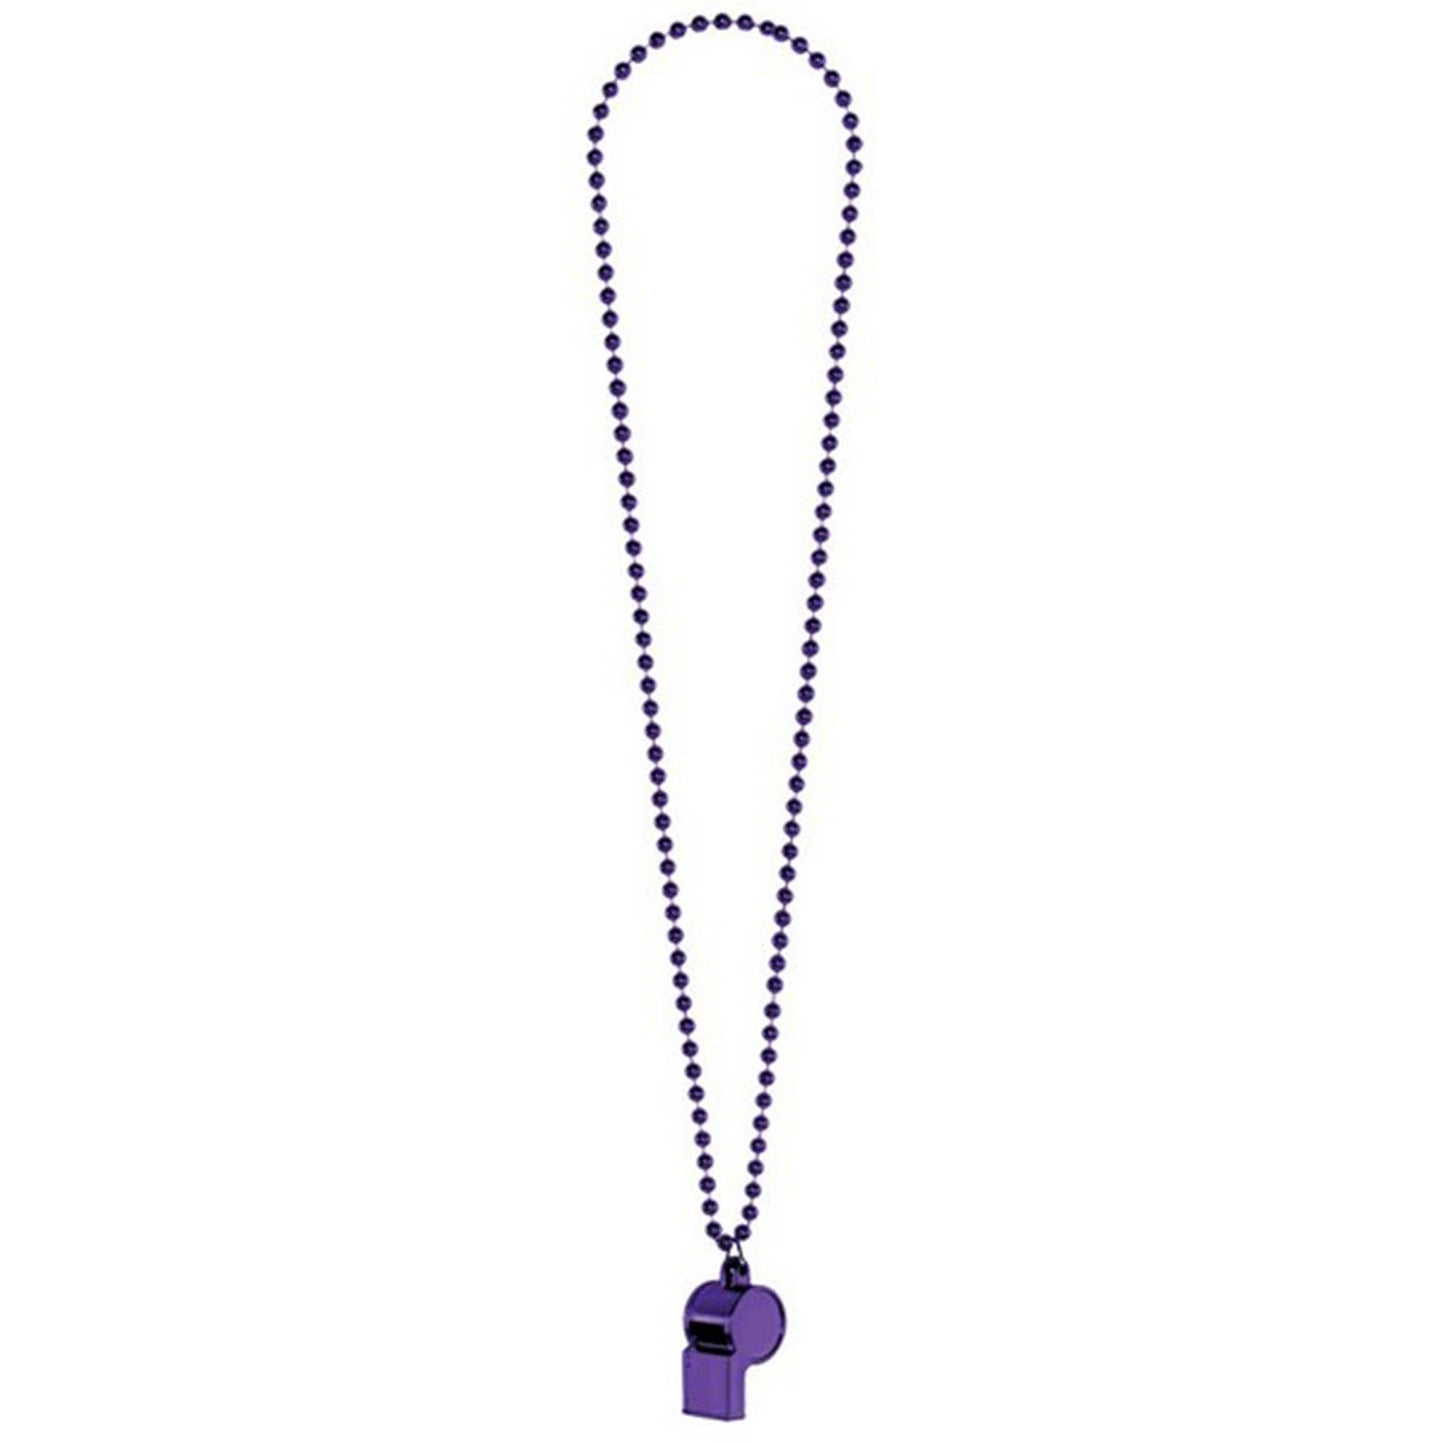 Whistle On Chain Necklace  - Purple